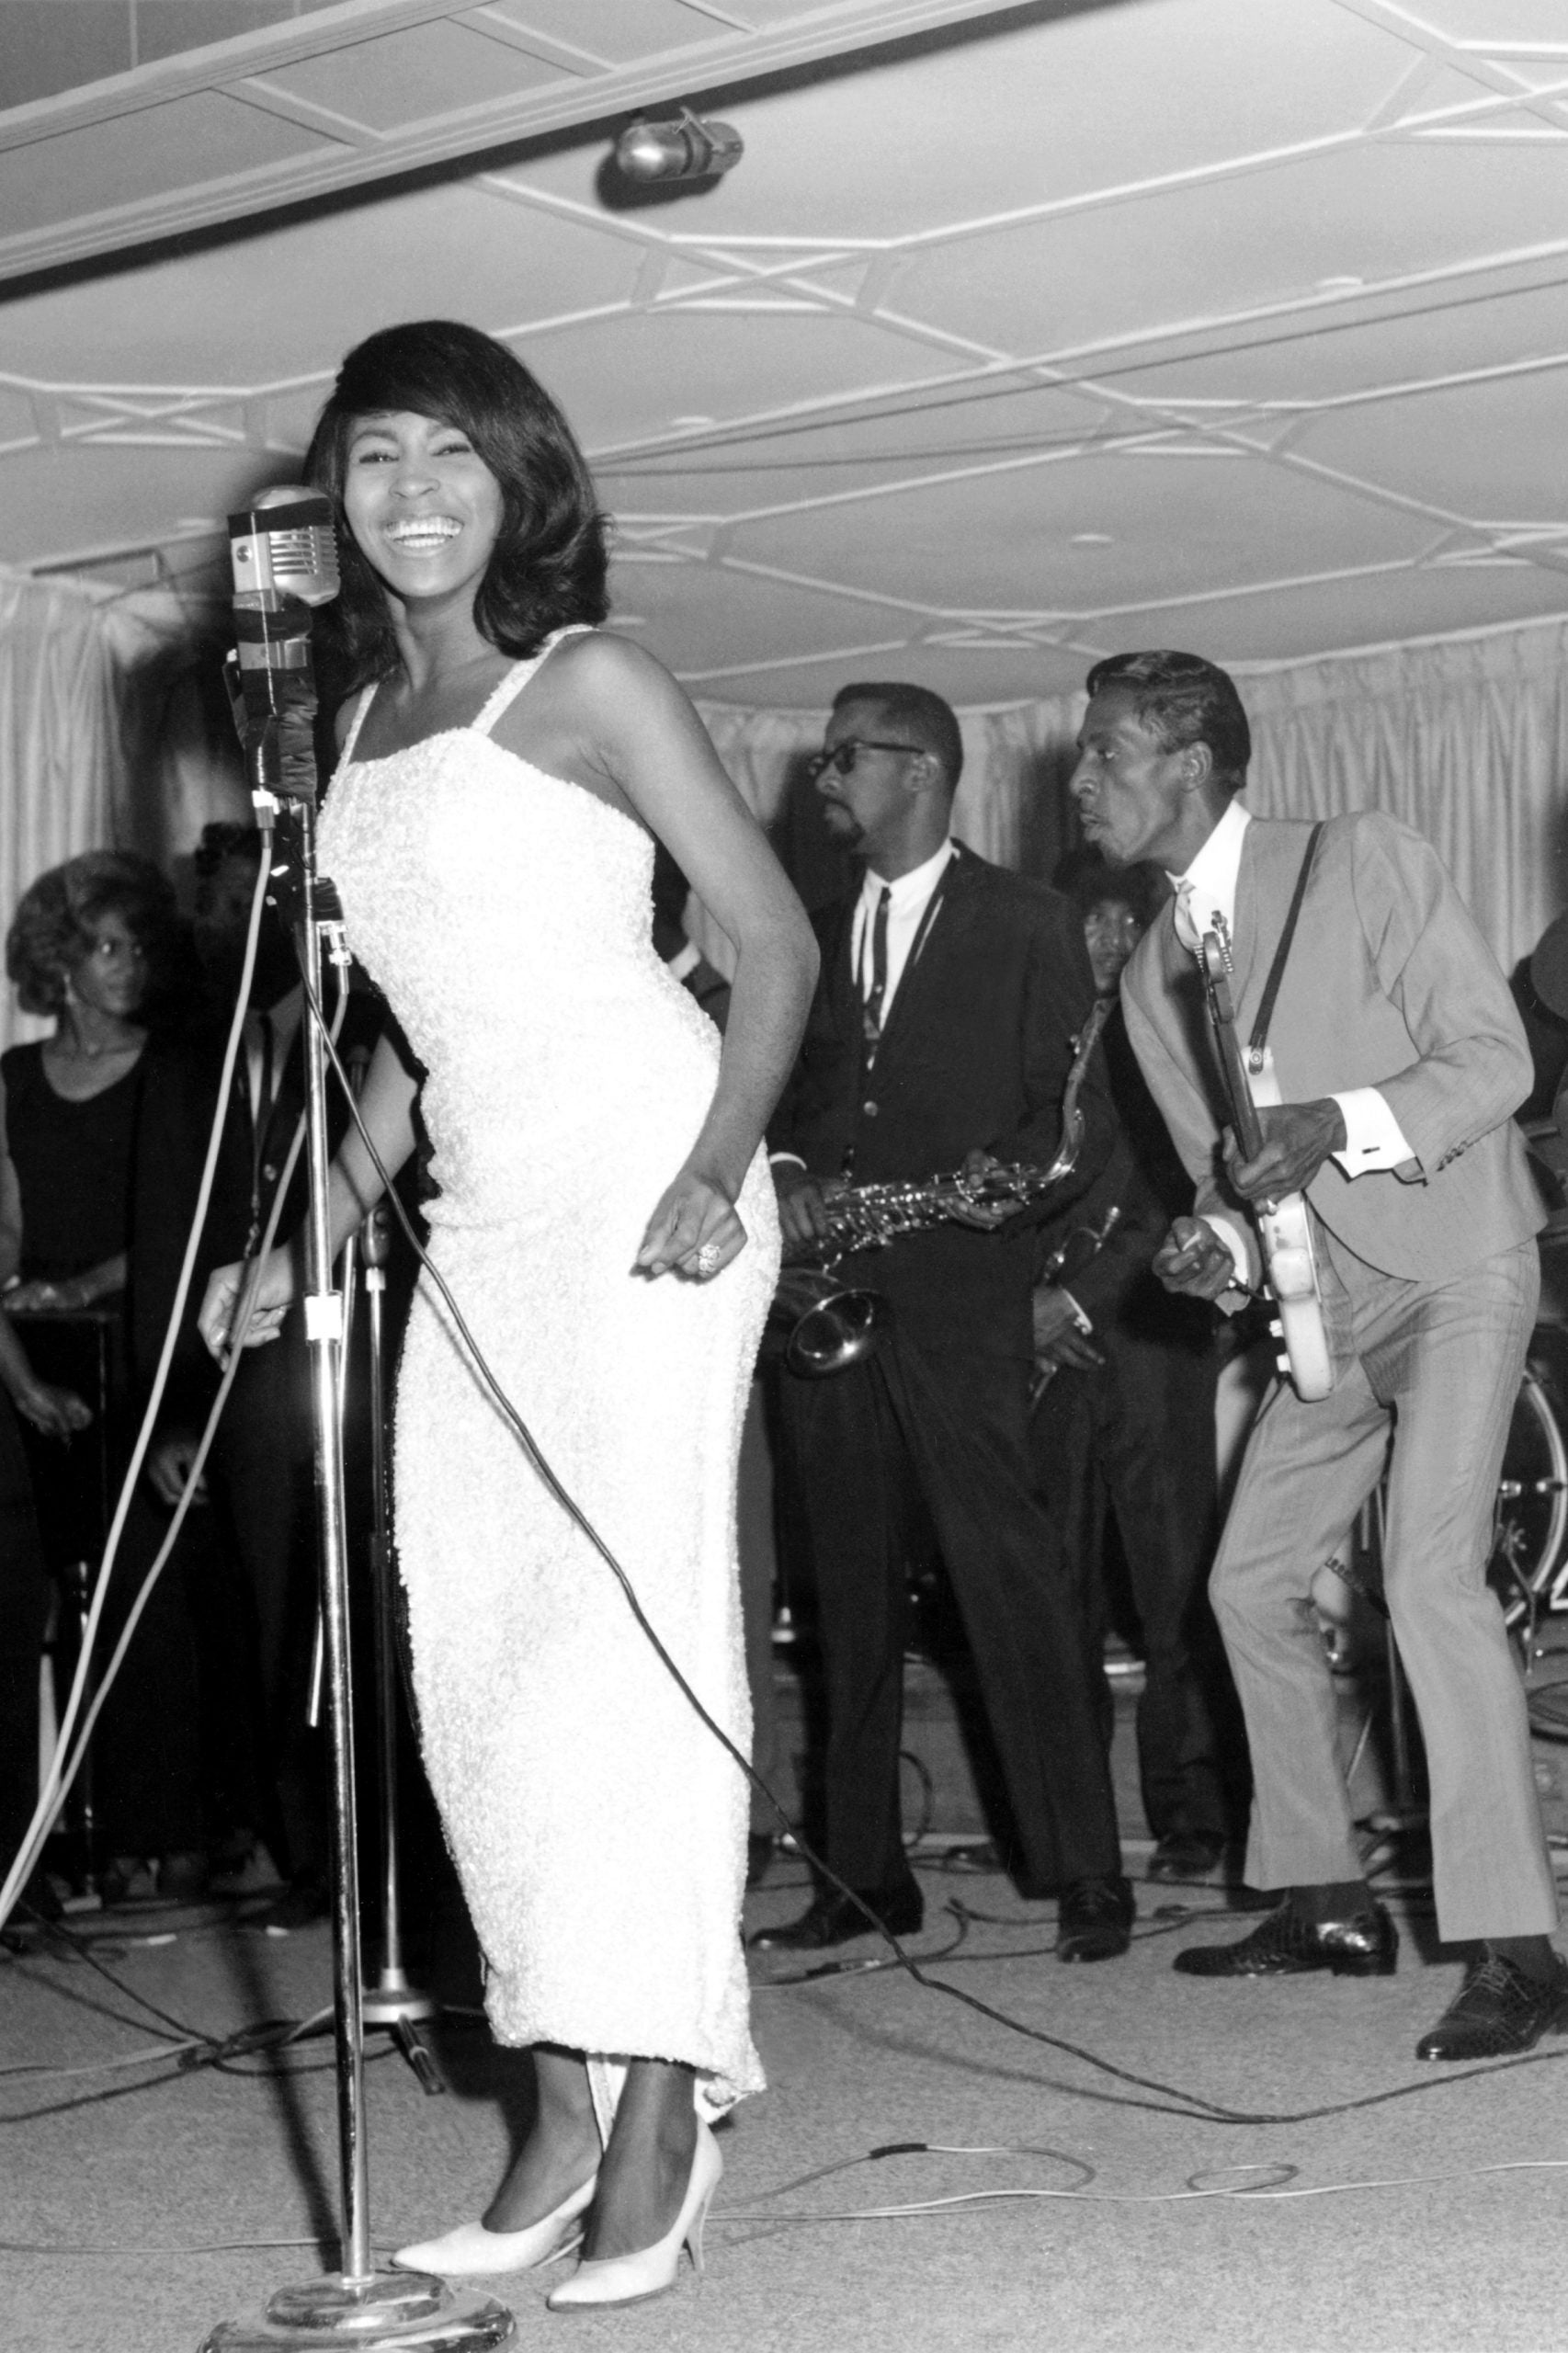 Honoring Tina Turner's Rock & Roll Style